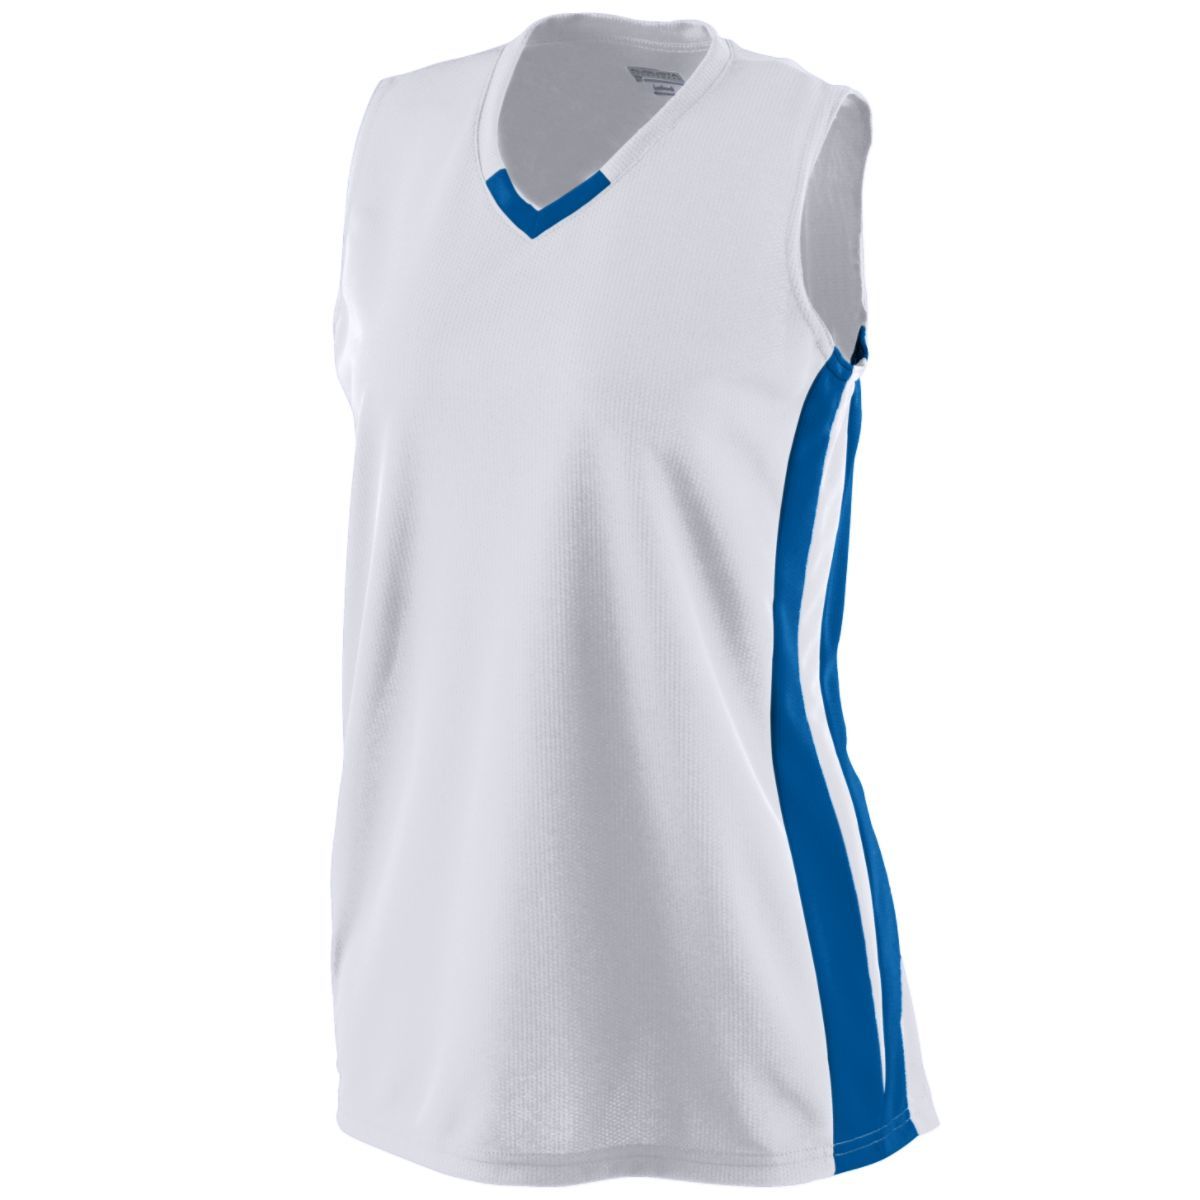 Augusta Sportswear Girls Wicking Mesh Powerhouse Jersey in White/Royal  -Part of the Girls, Augusta-Products, Softball, Girls-Jersey, Shirts product lines at KanaleyCreations.com